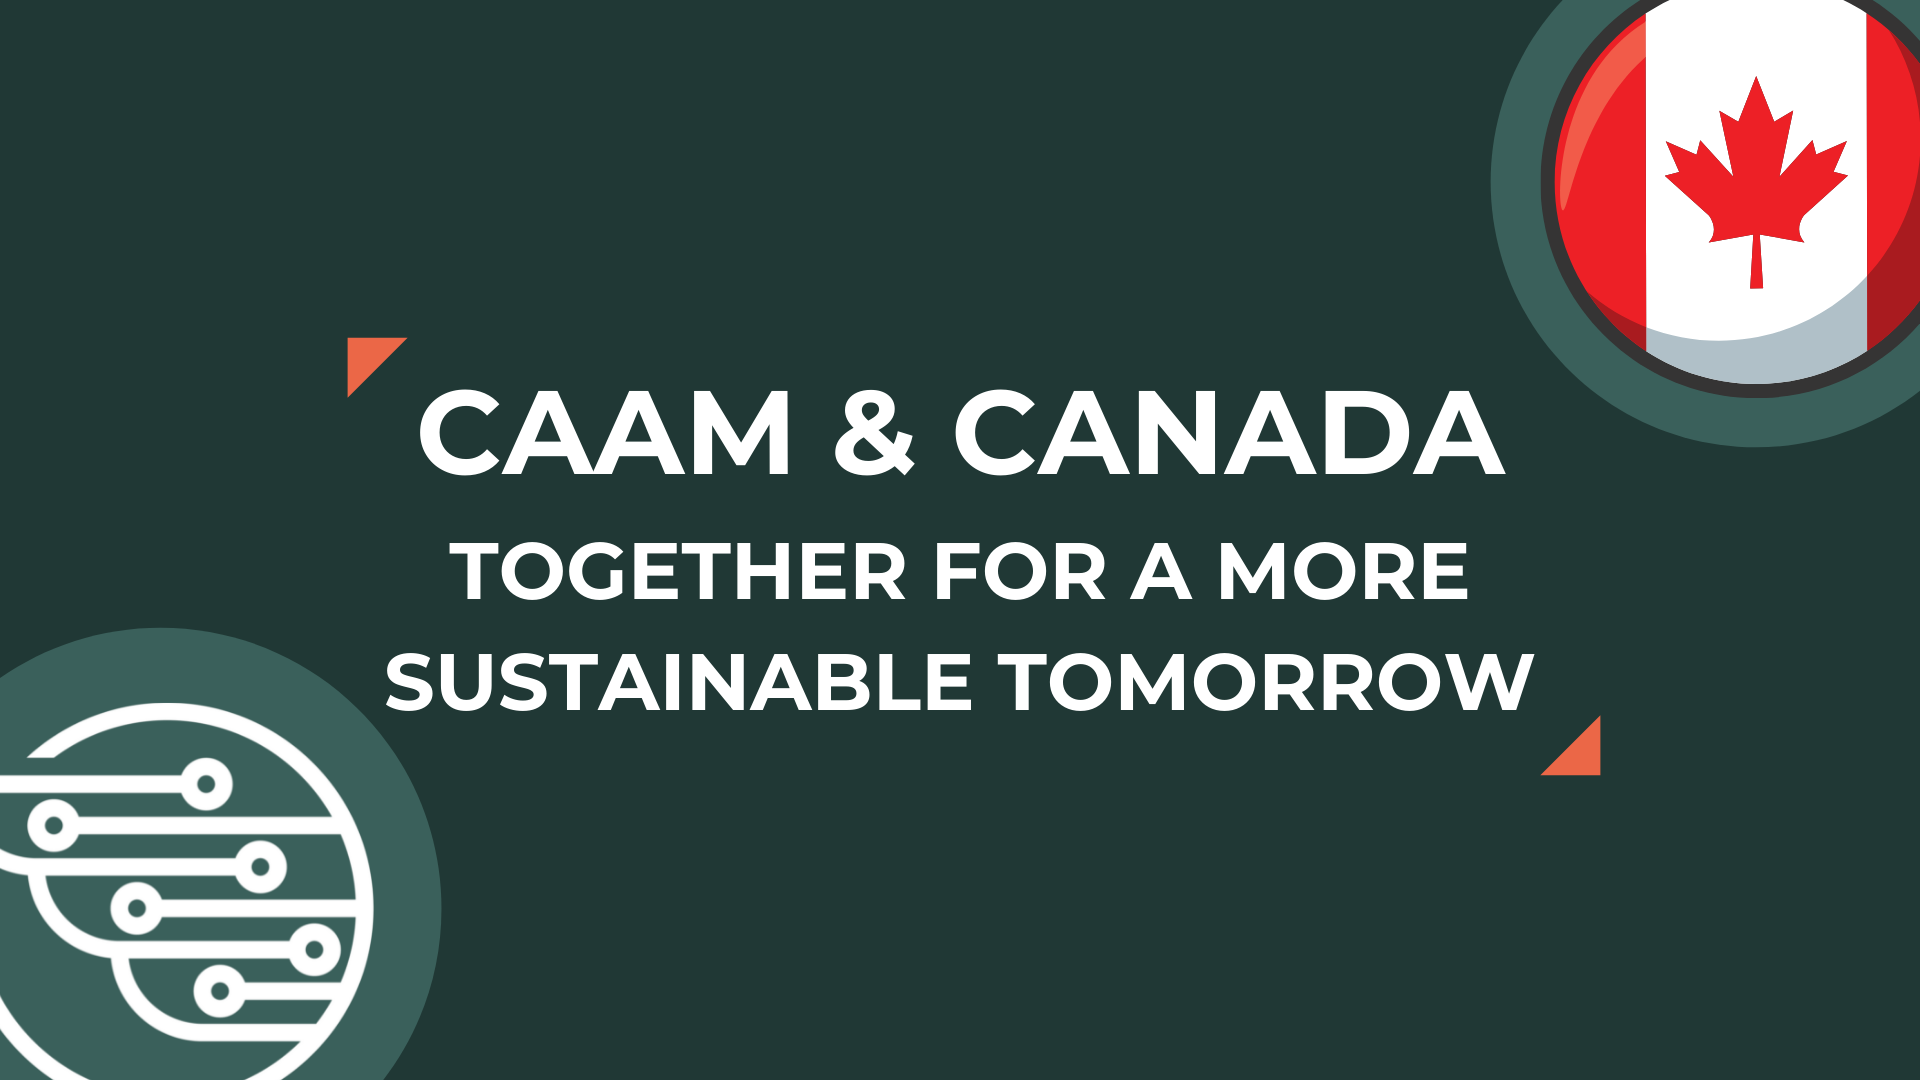 CAAM and Canada: Together for a more sustainable tomorrow